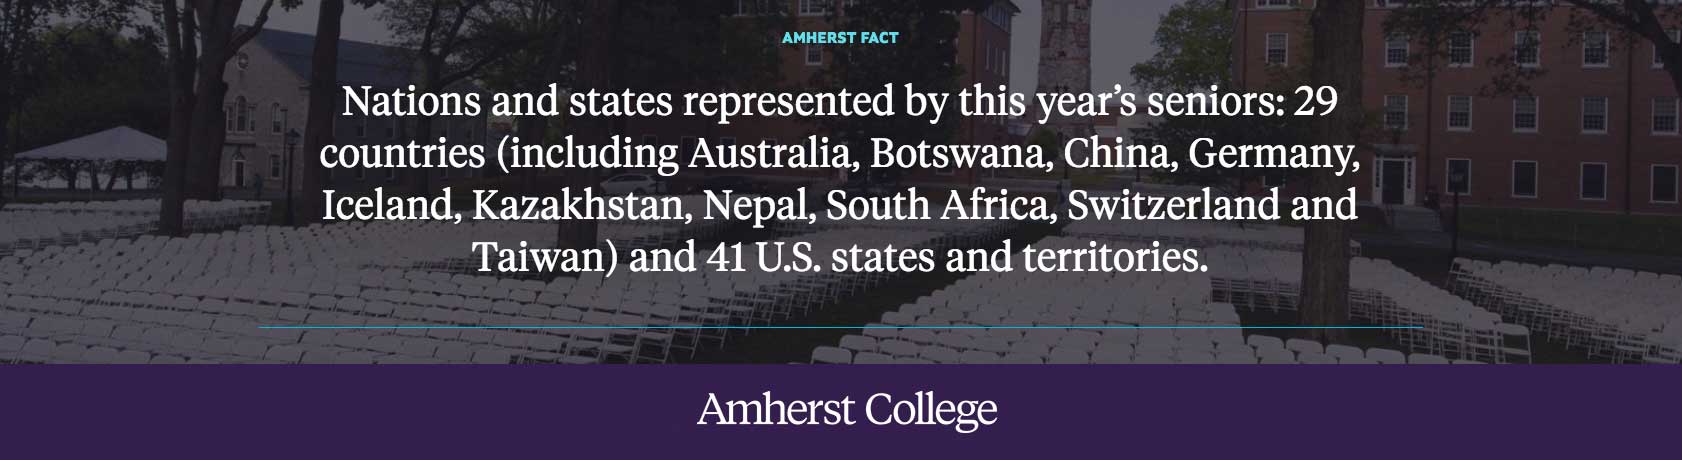 Nations and states represented by this year's senior class: Amherst College